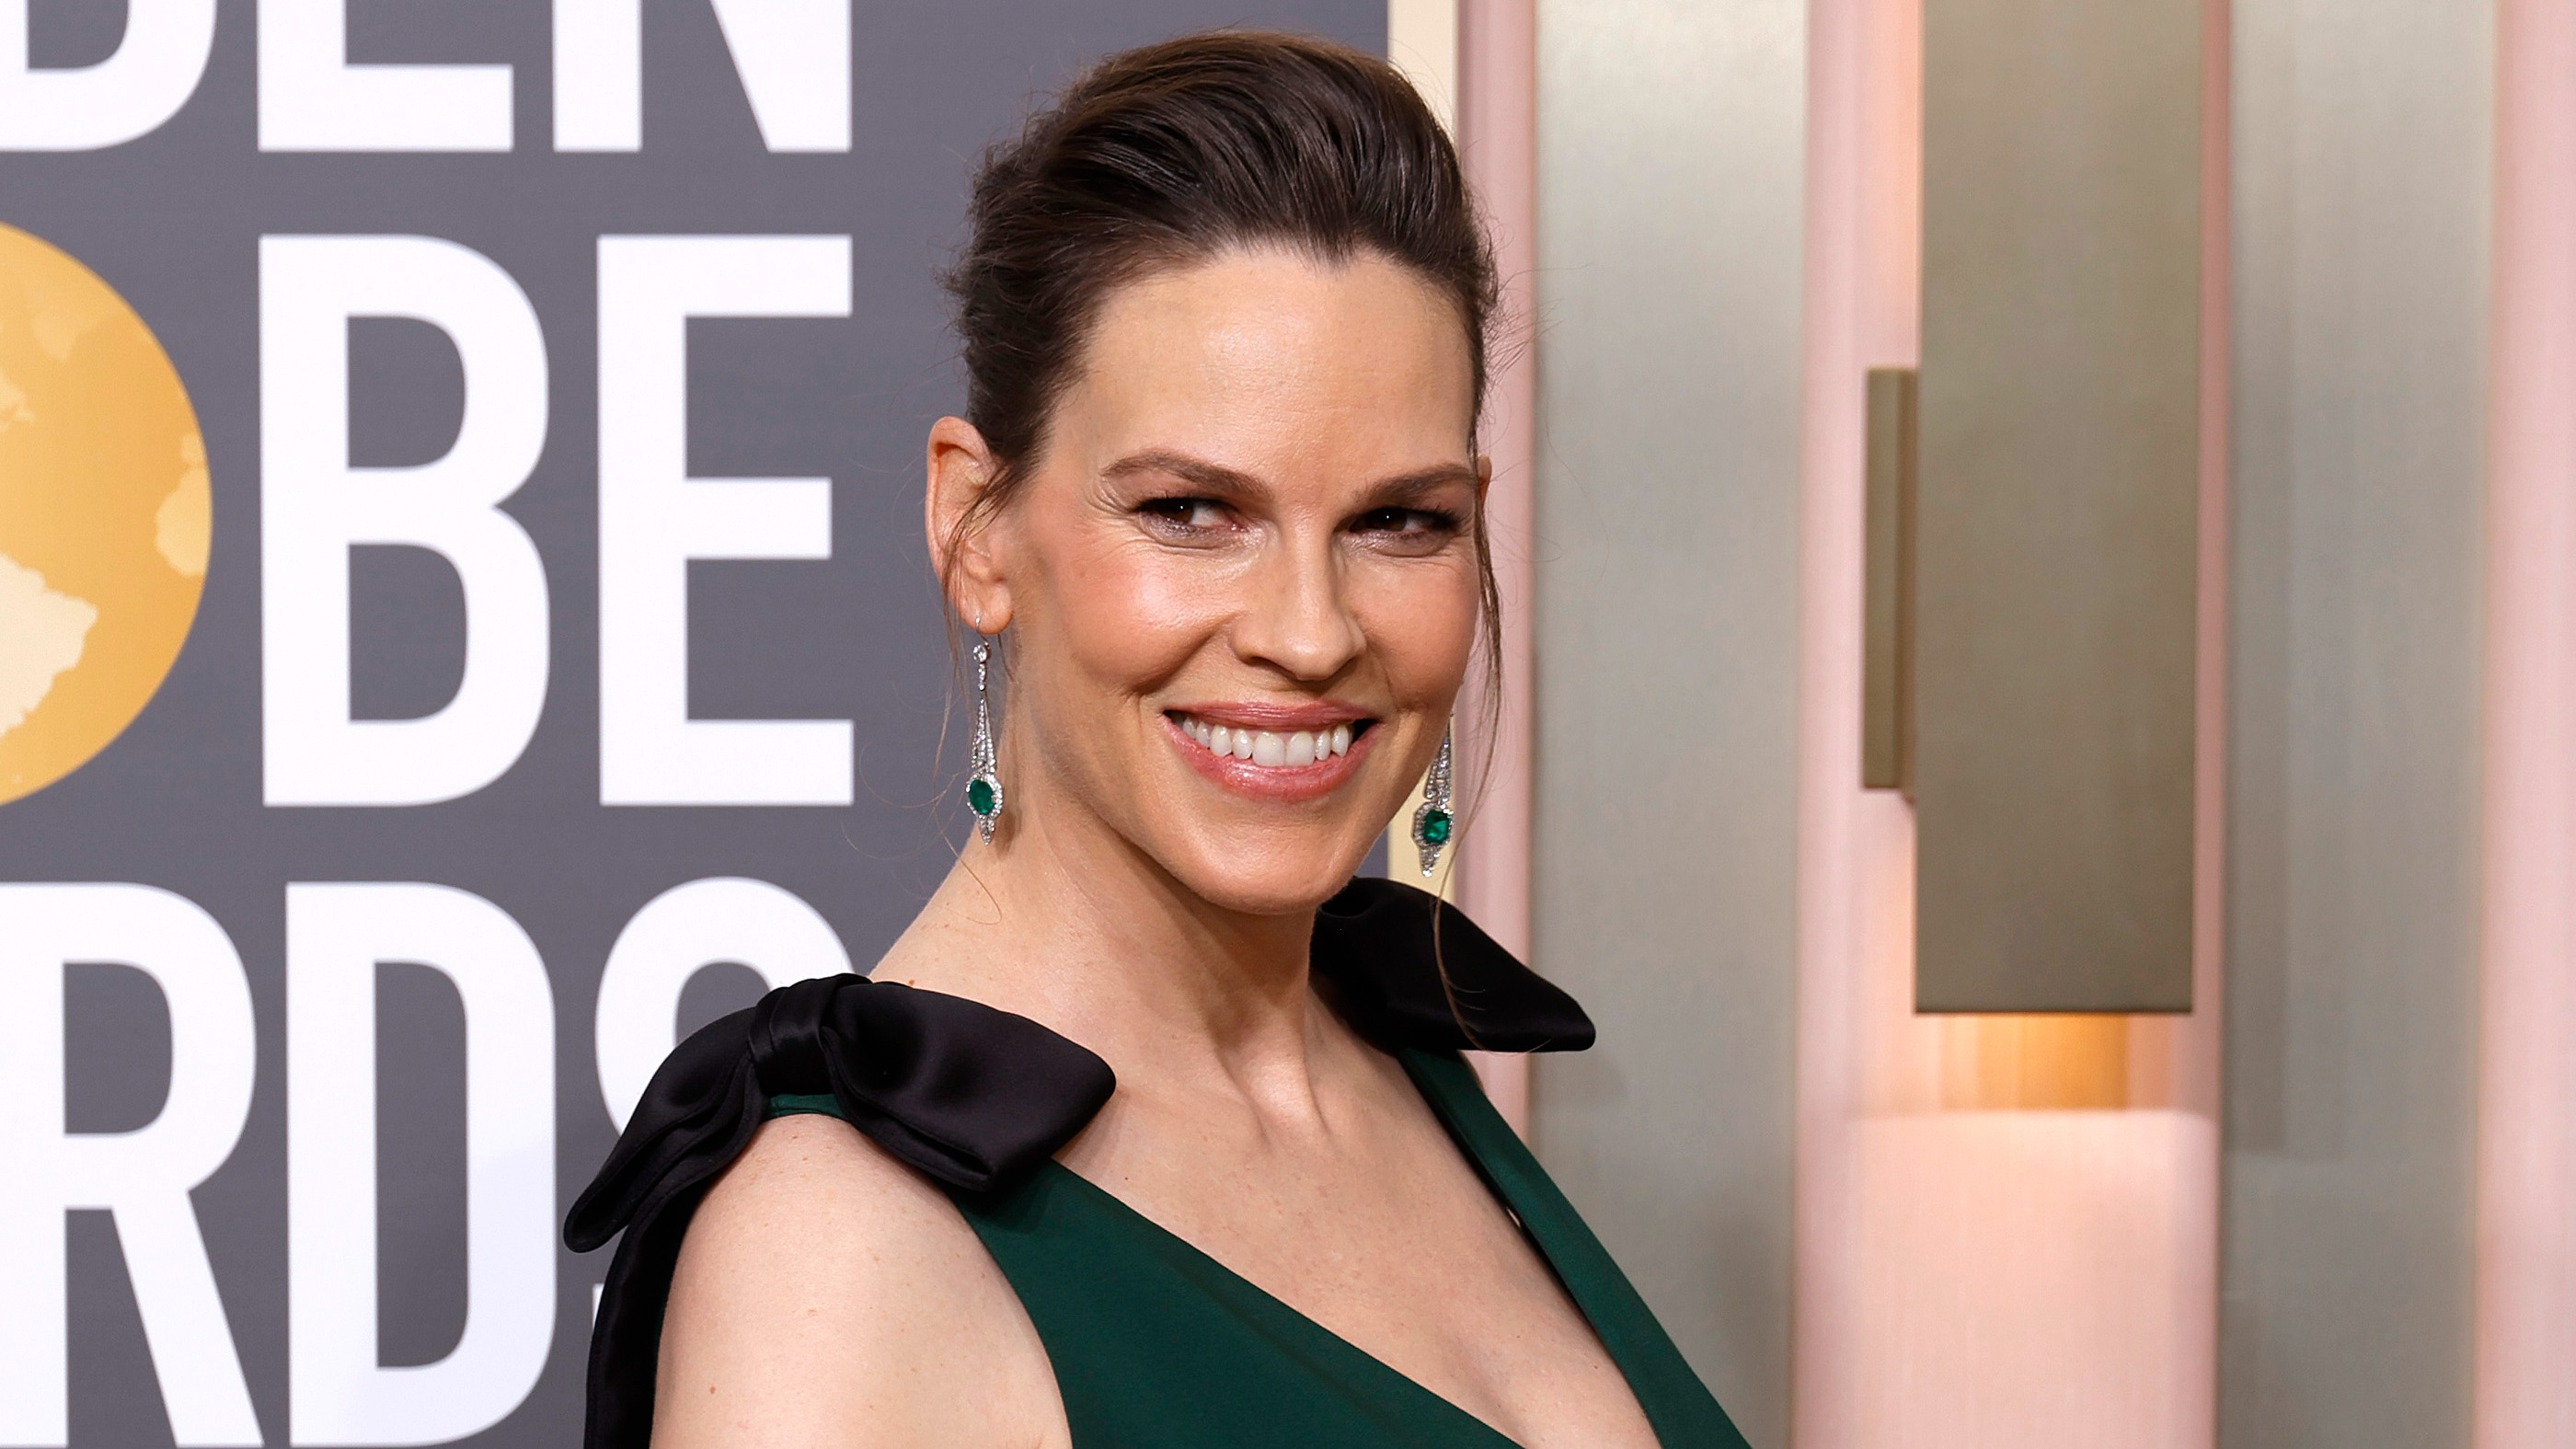 Pregnant Hilary Swank Is 'Ready' for Parenthood With Philip Schneider